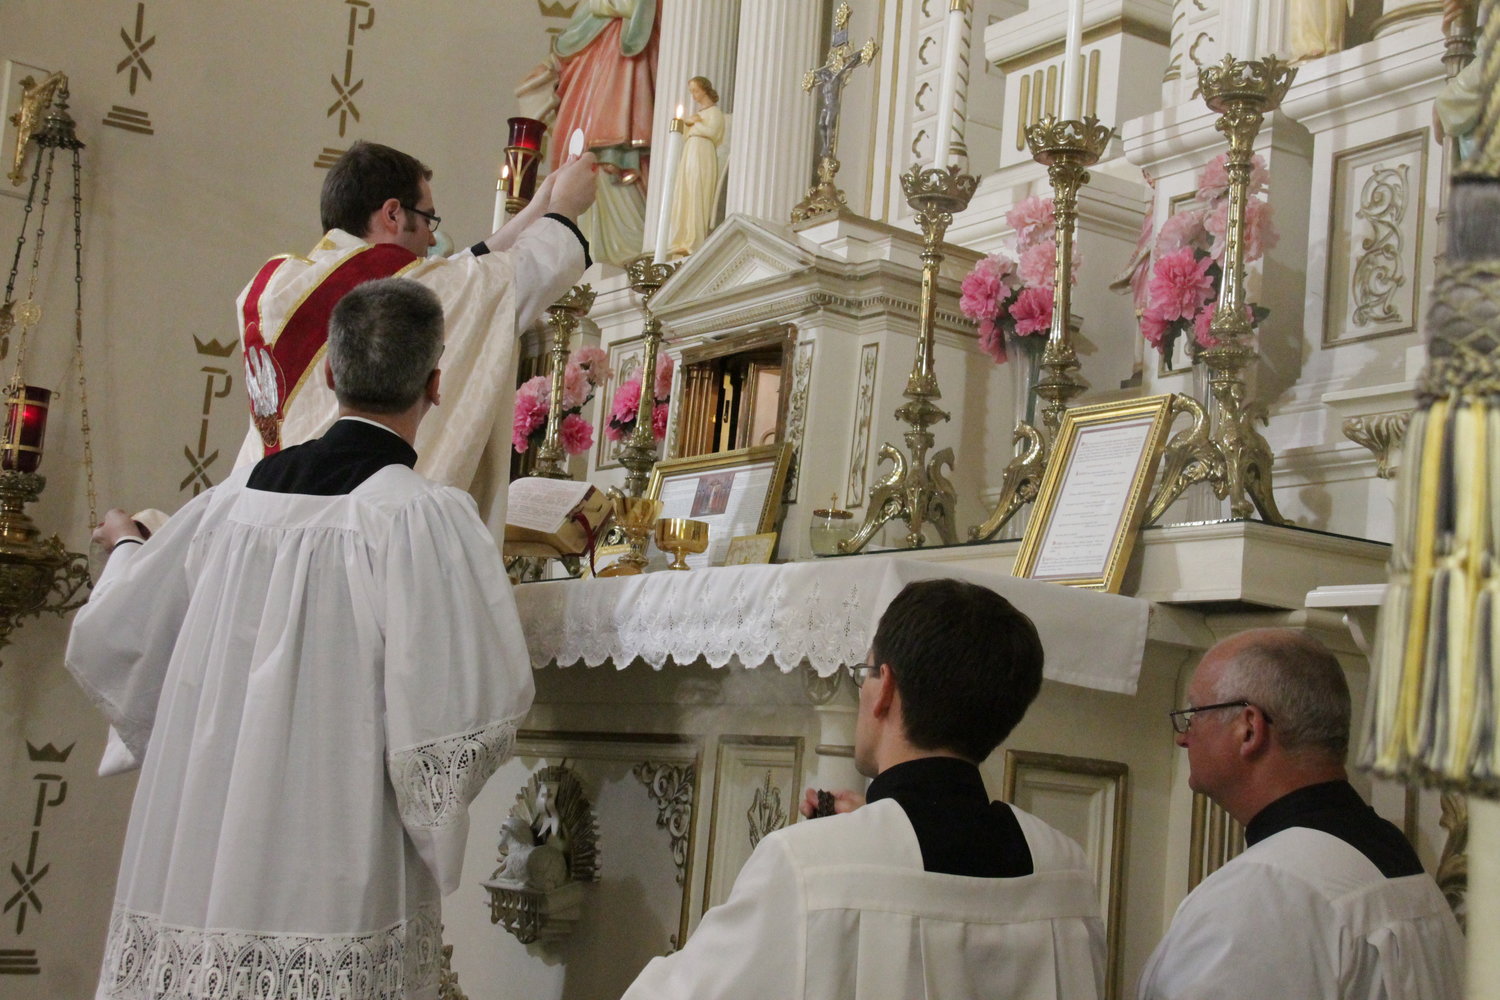 Father Dylan Schrader elevates the Most Blessed Sacrament during a Mass in Latin in the Extraordinary Form in St. Joseph Church in Westphalia.